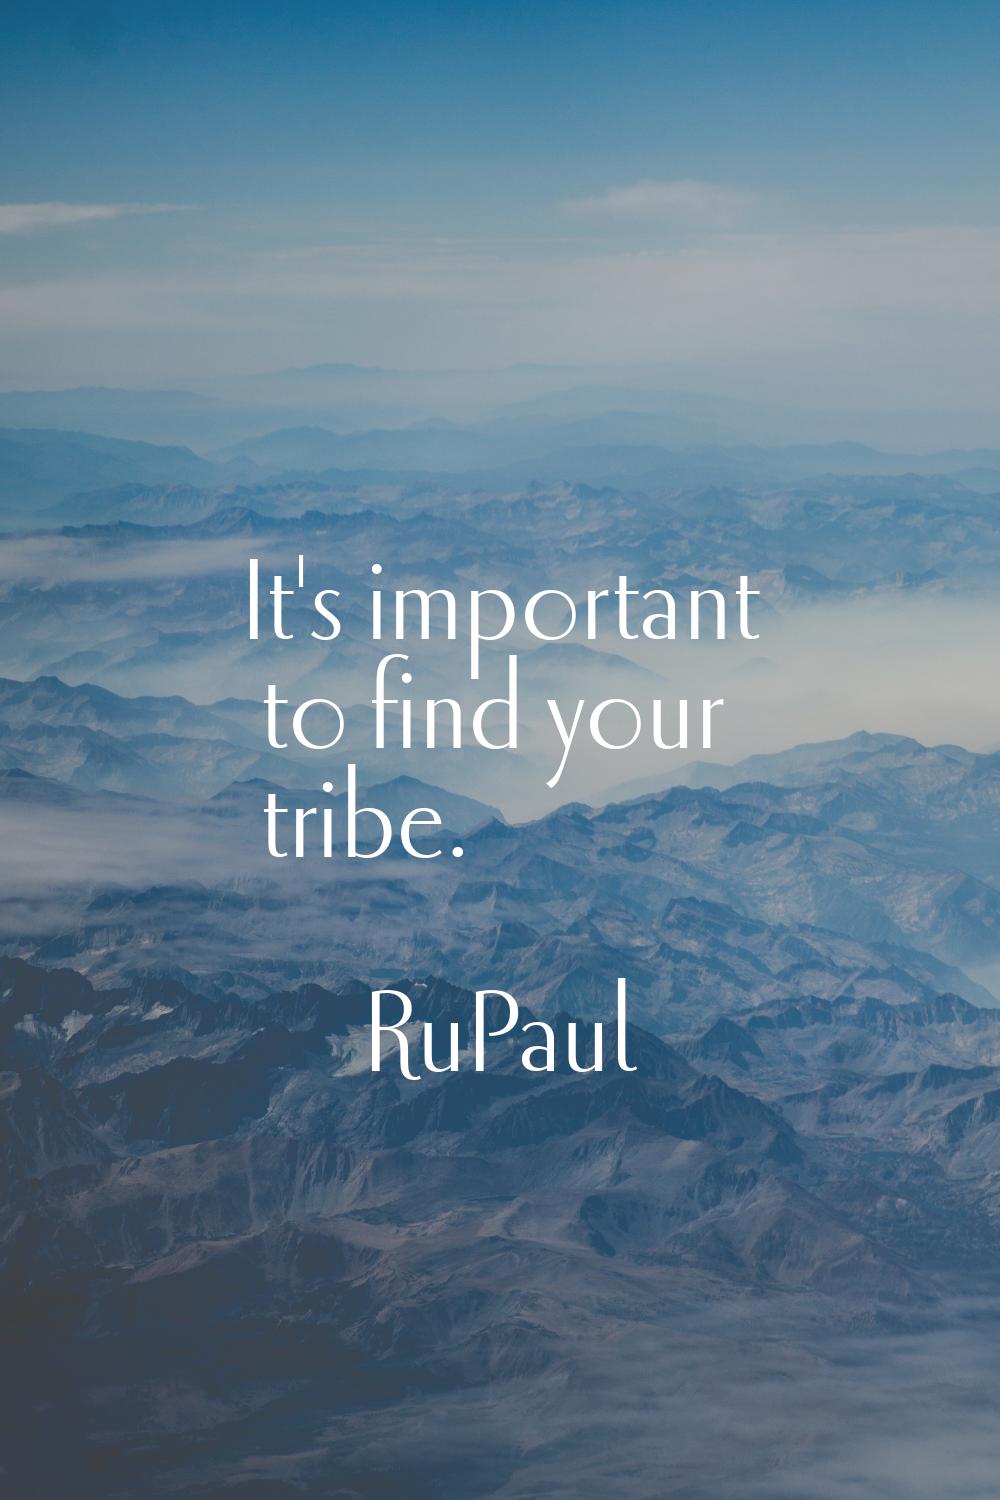 It's important to find your tribe.